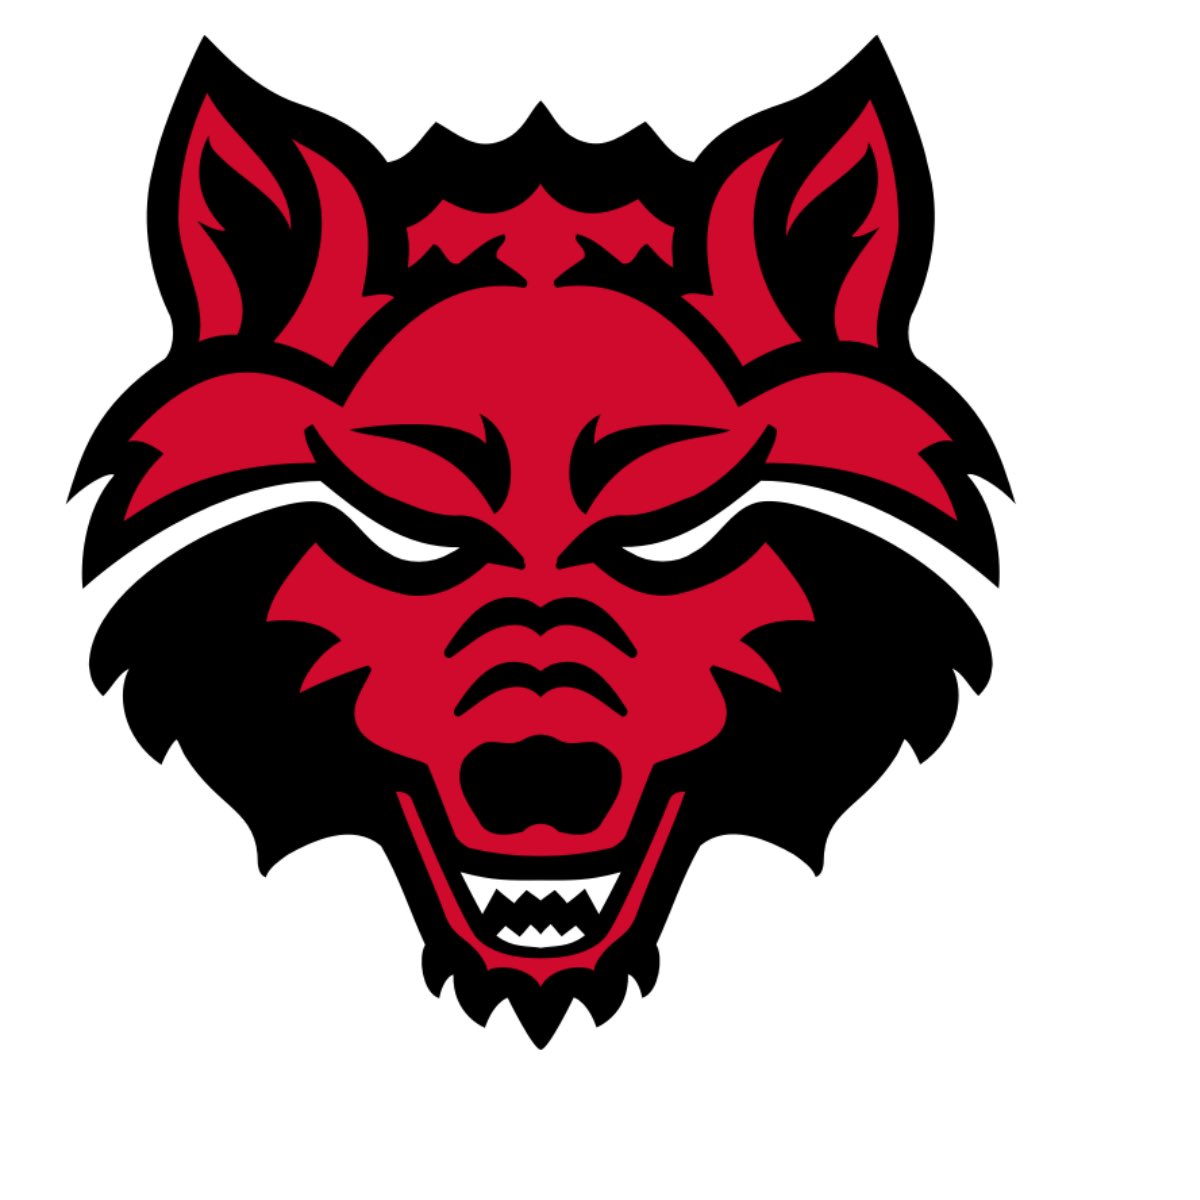 #AGTG I’m beyond blessed to receive my first Division 1 offer from Arkansas State University🔥 @CoachJayMitch @TheCoachPaul7 @Coach_Muhammed @coachqwalker @KWhitley20 @LancasterFBwebo